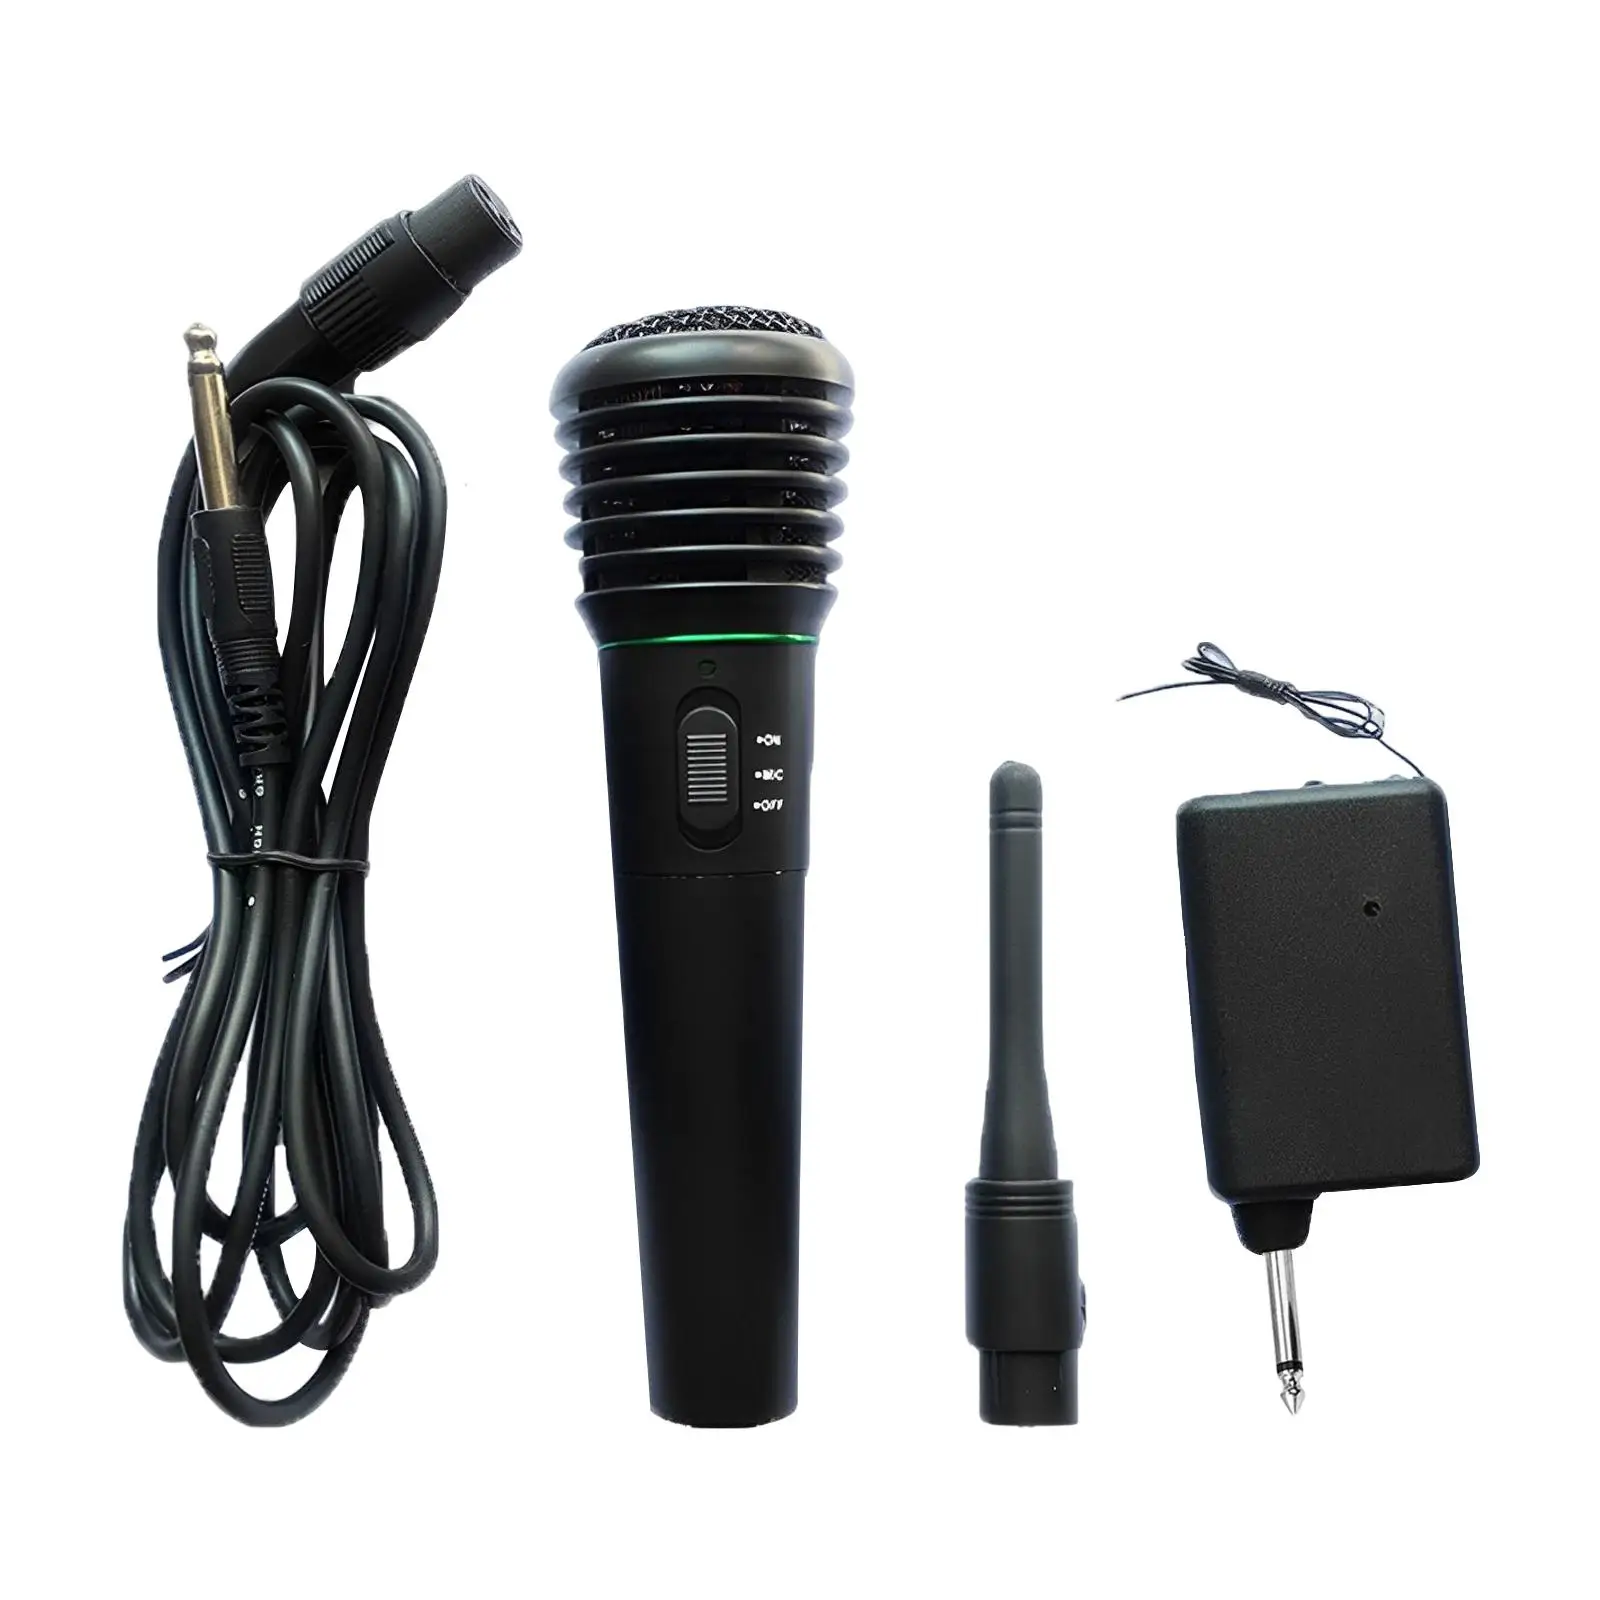 Wireless Microphones System 2 in 1 Plug and Play Durable Vocal Microphone for Karaoke Singing Desktop PC Party Meeting Amplifie